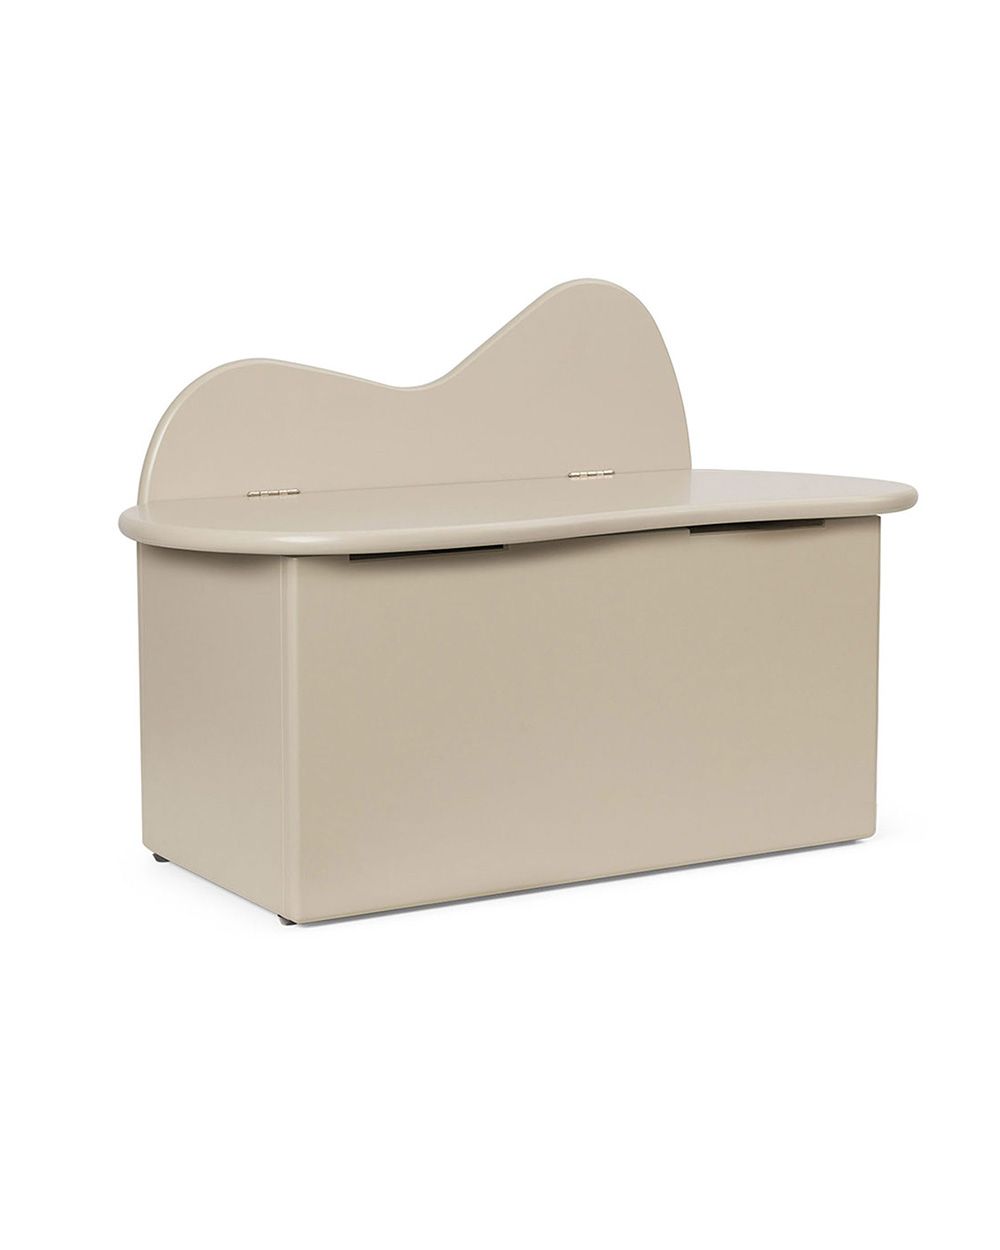 Slope Storage Bench from Ferm Living